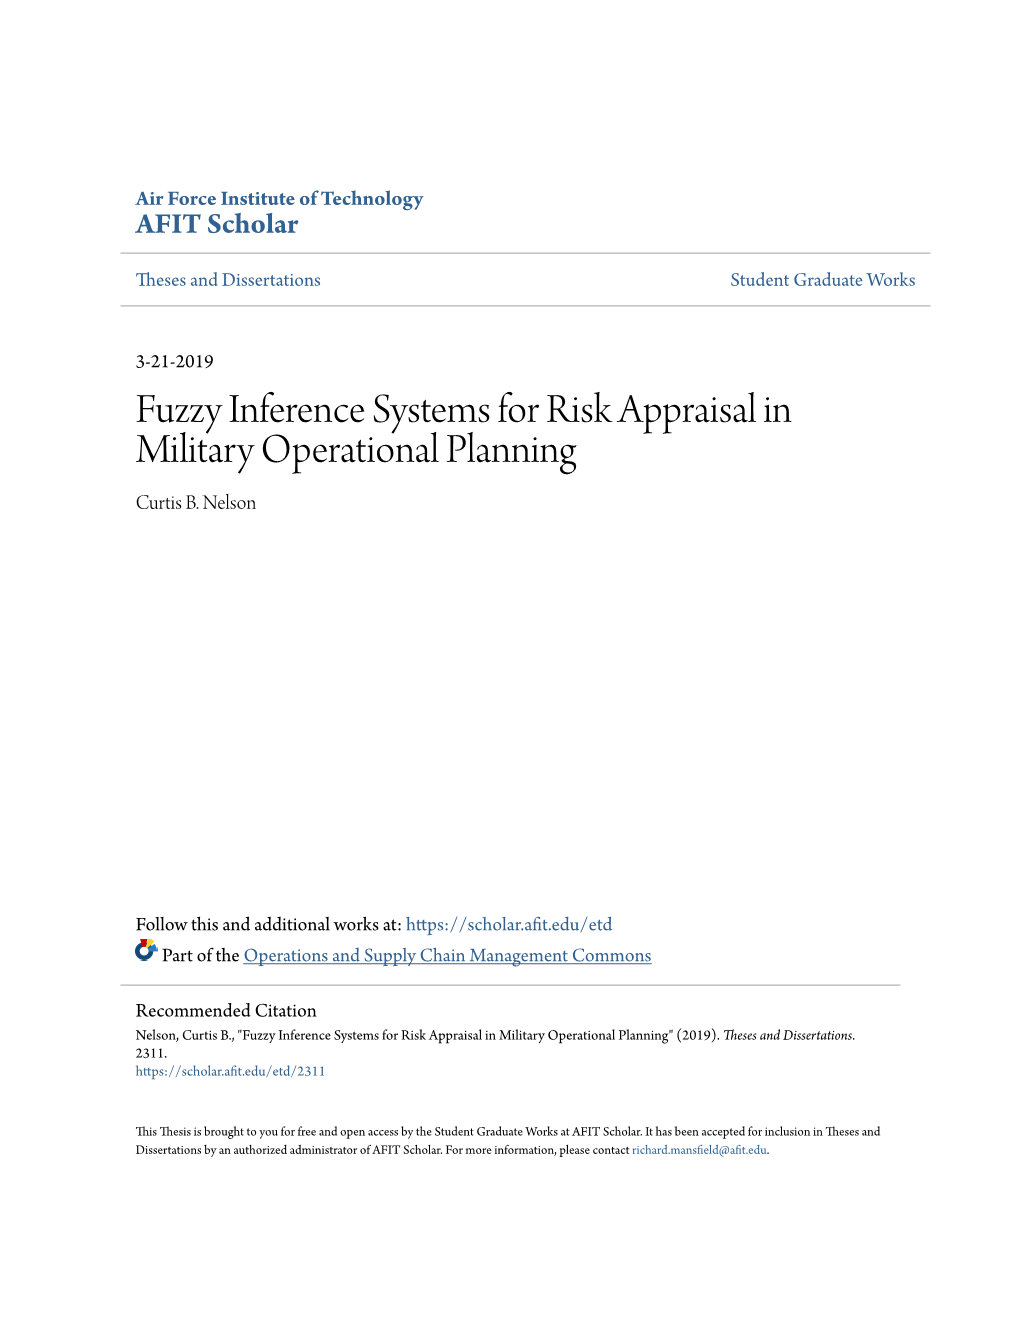 Fuzzy Inference Systems for Risk Appraisal in Military Operational Planning Curtis B